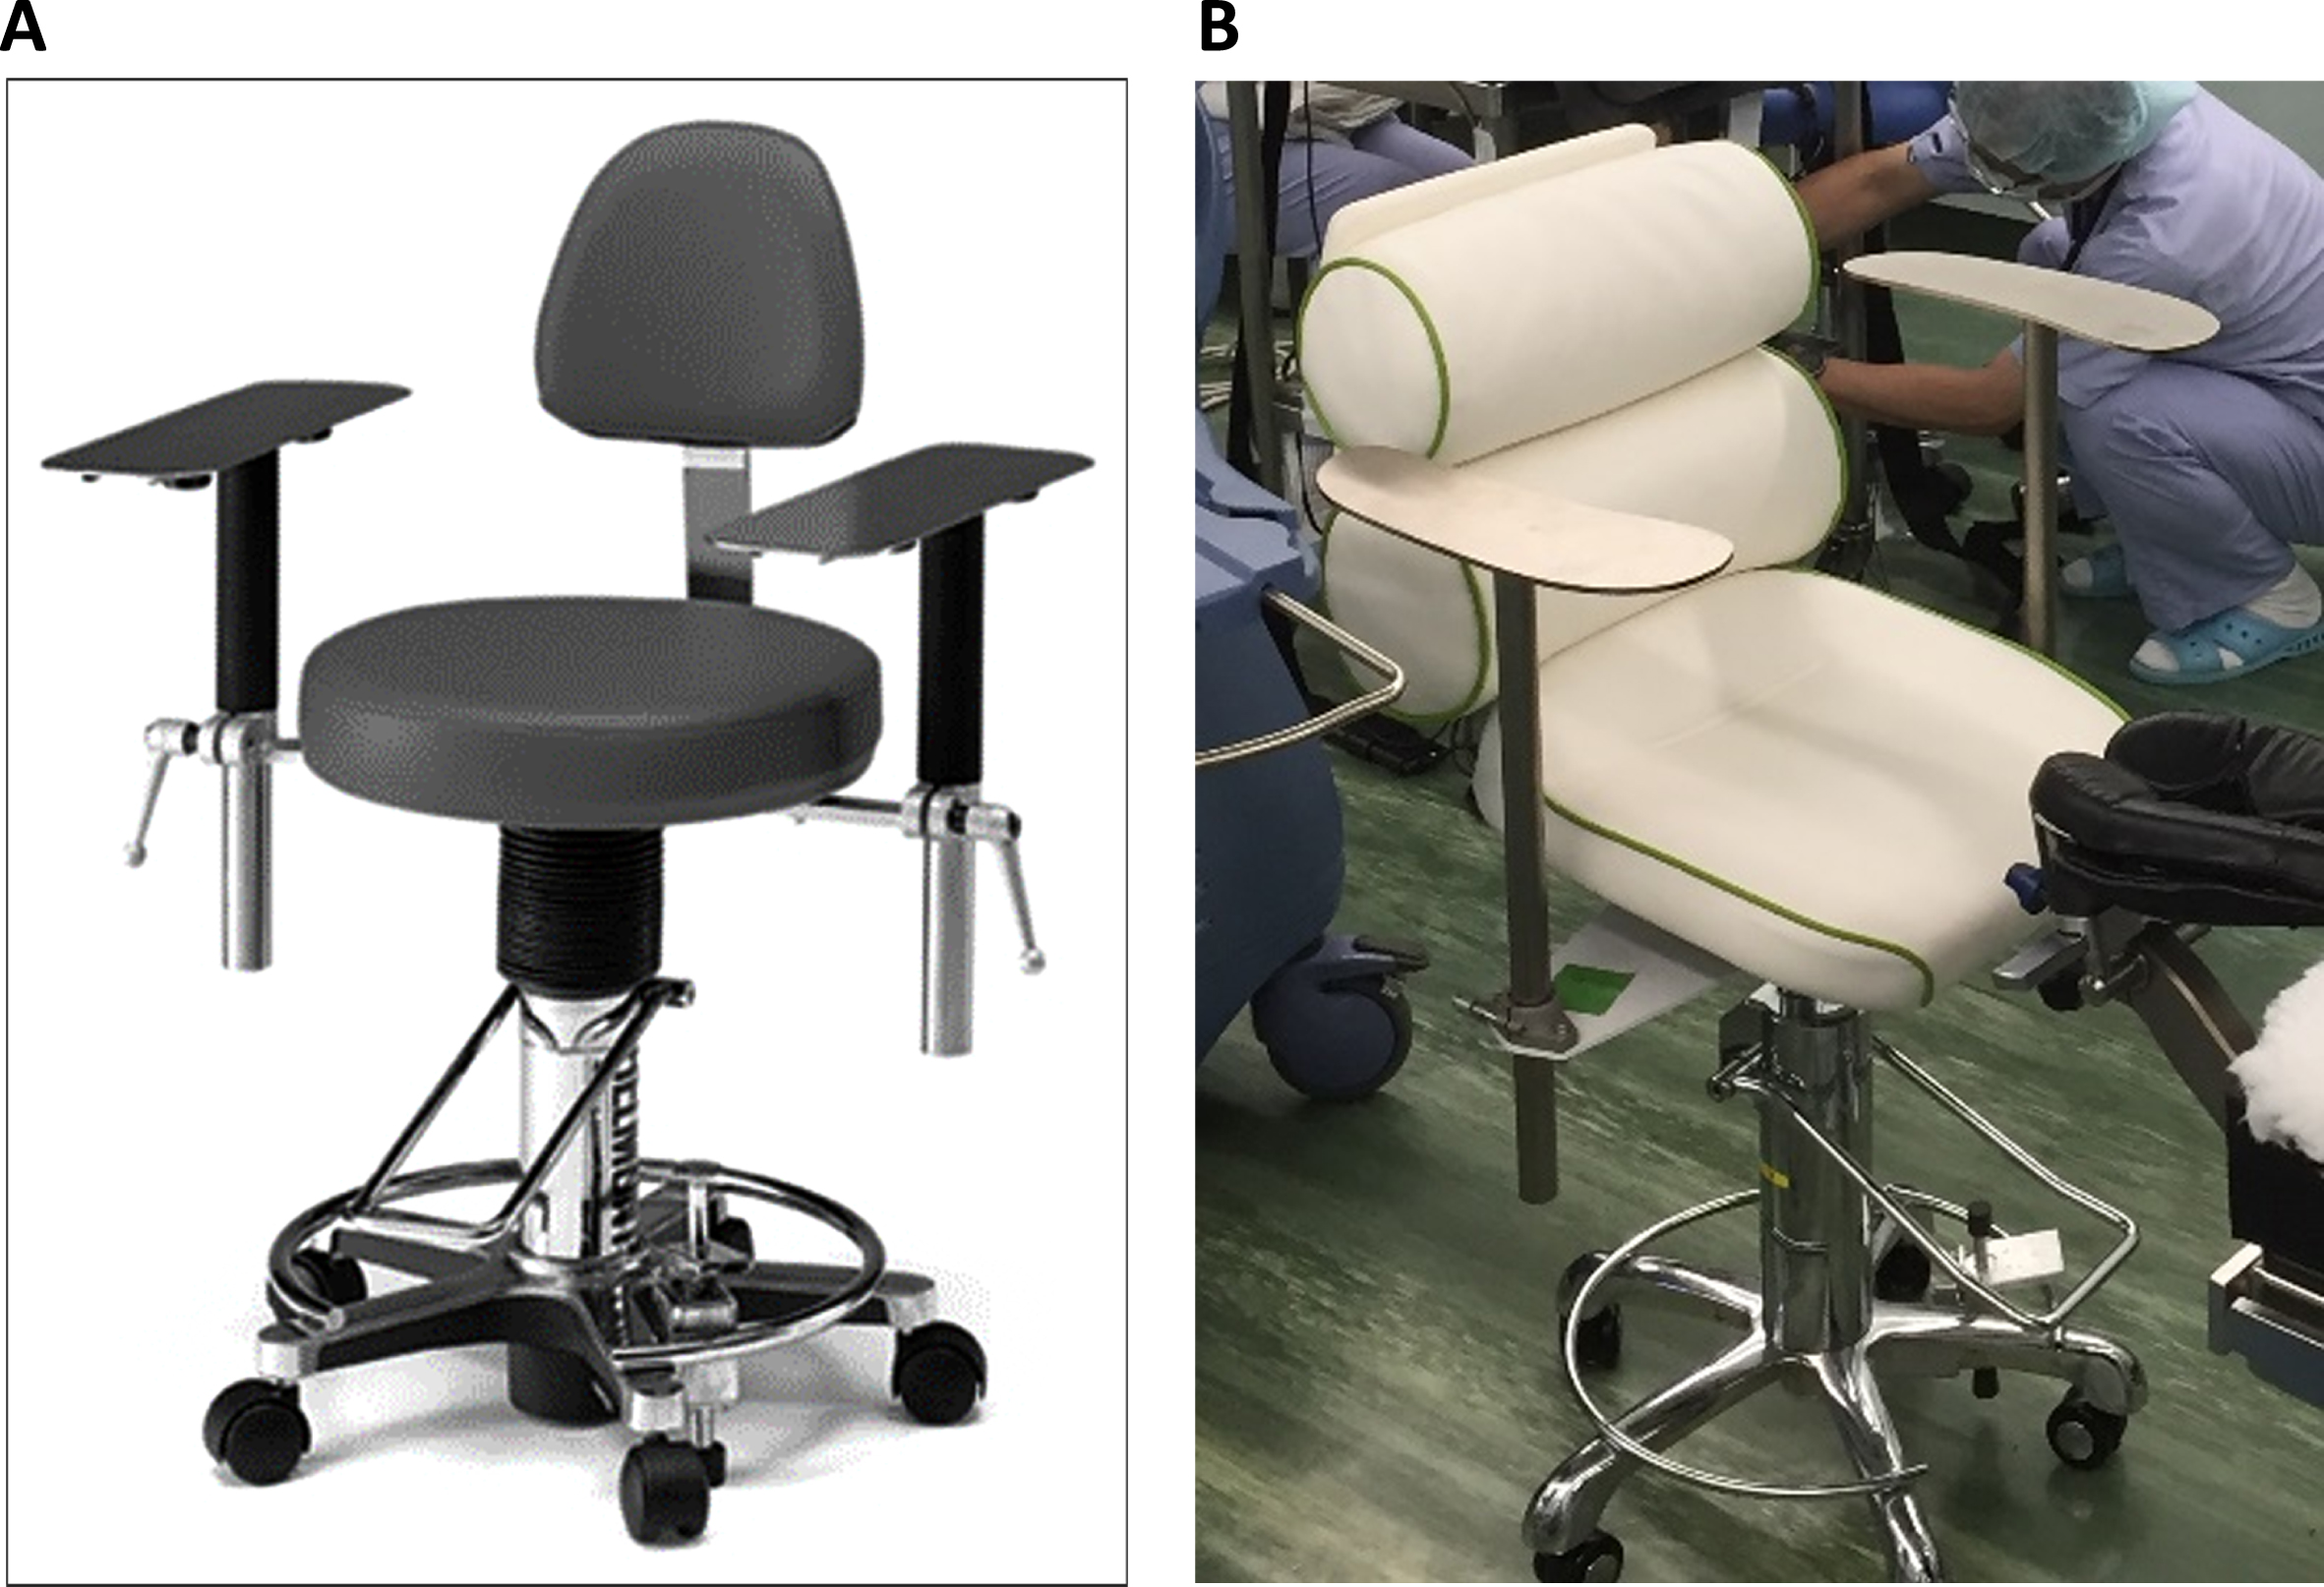 (A) Conventional chair used in the operating room. (B) Prototype chair.